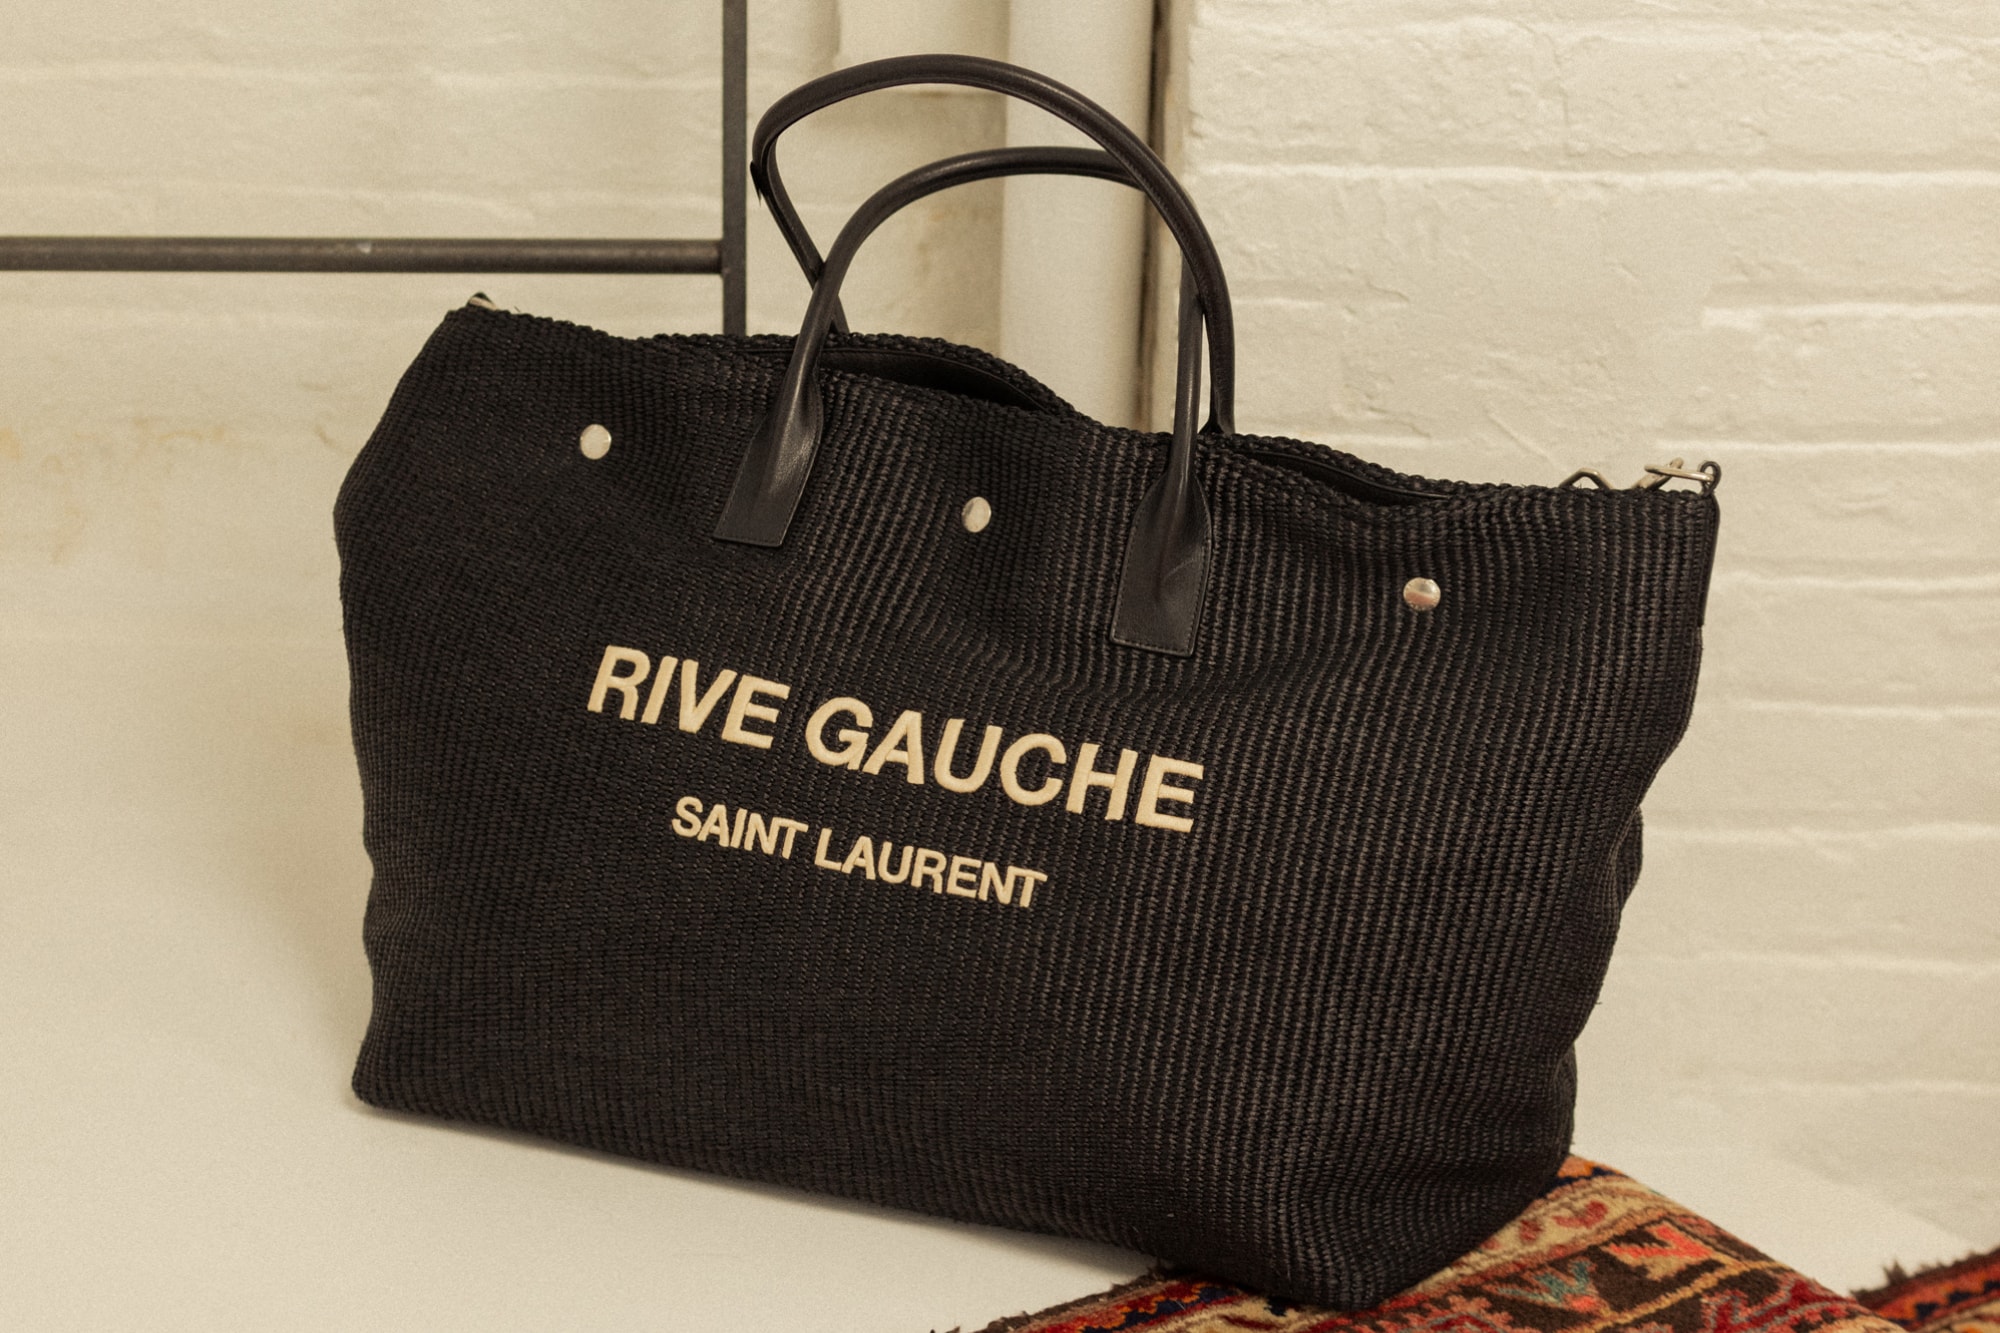 Saint Laurent Holiday Gift Guide - Runway, Apparel, Accessories, Home Decor